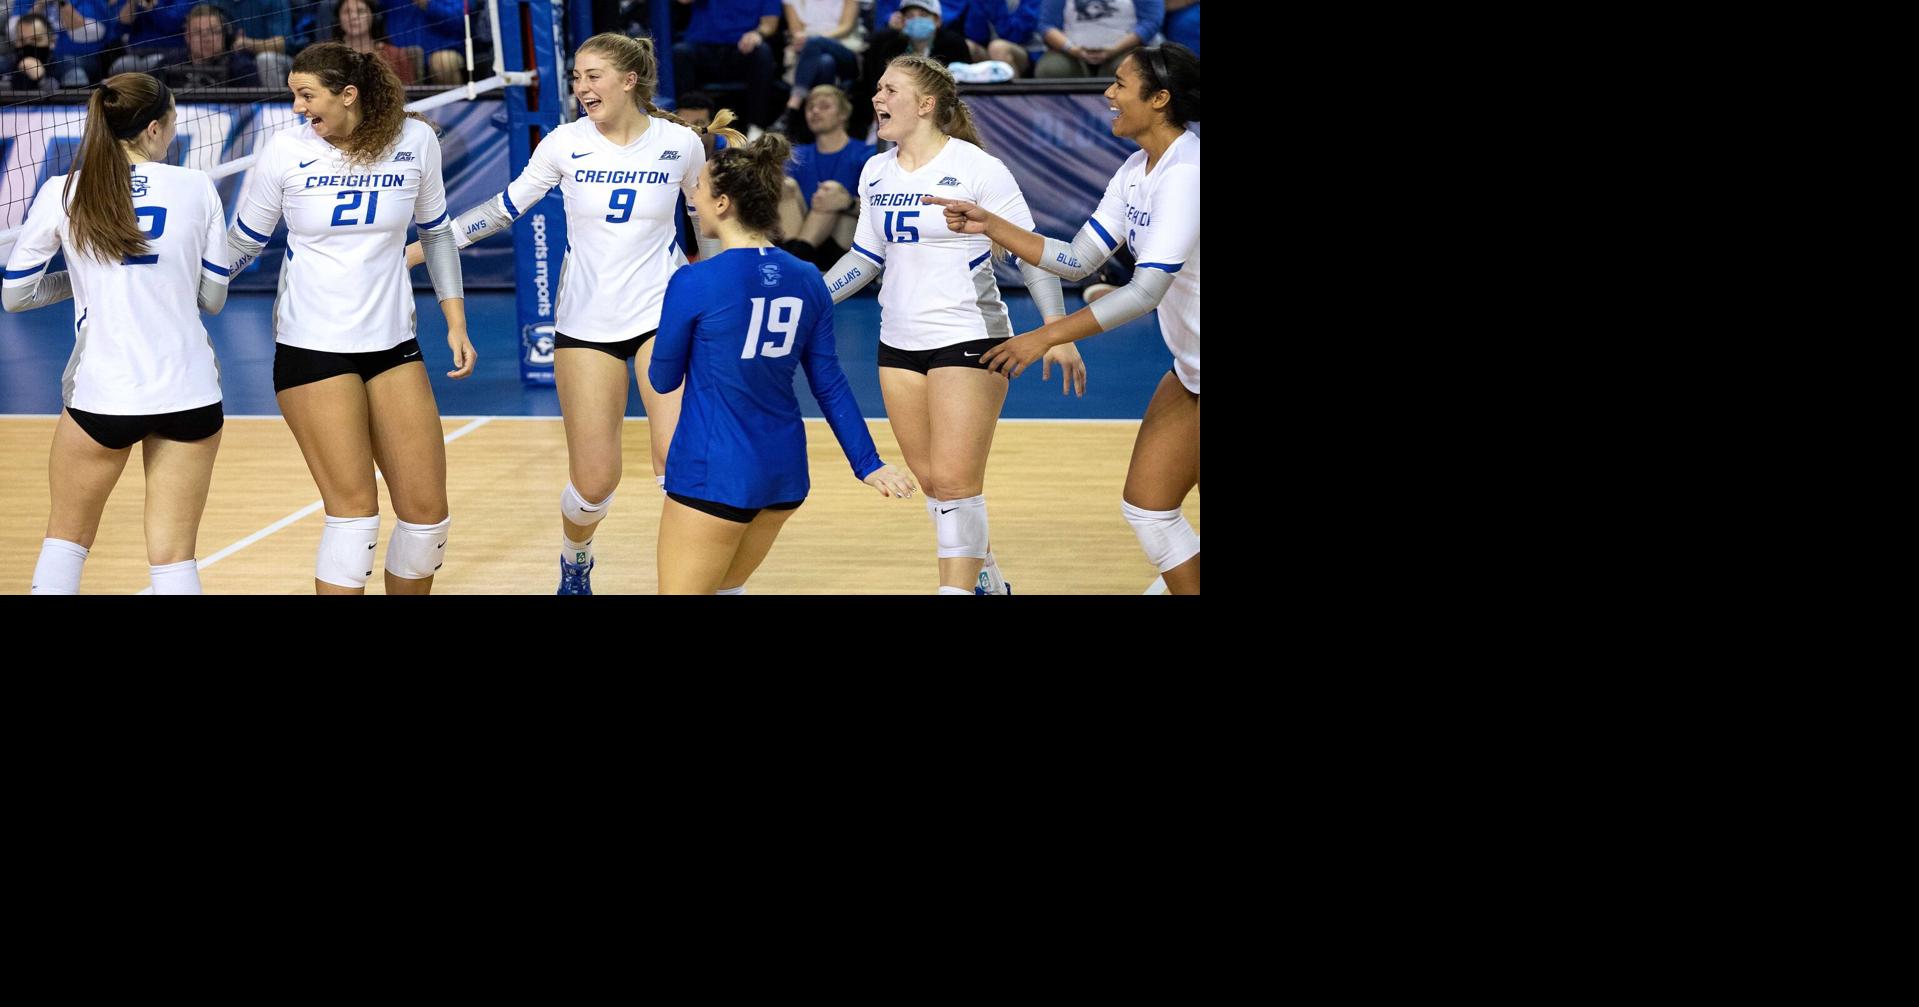 Creighton volleyball has the potential to a Final Four contender